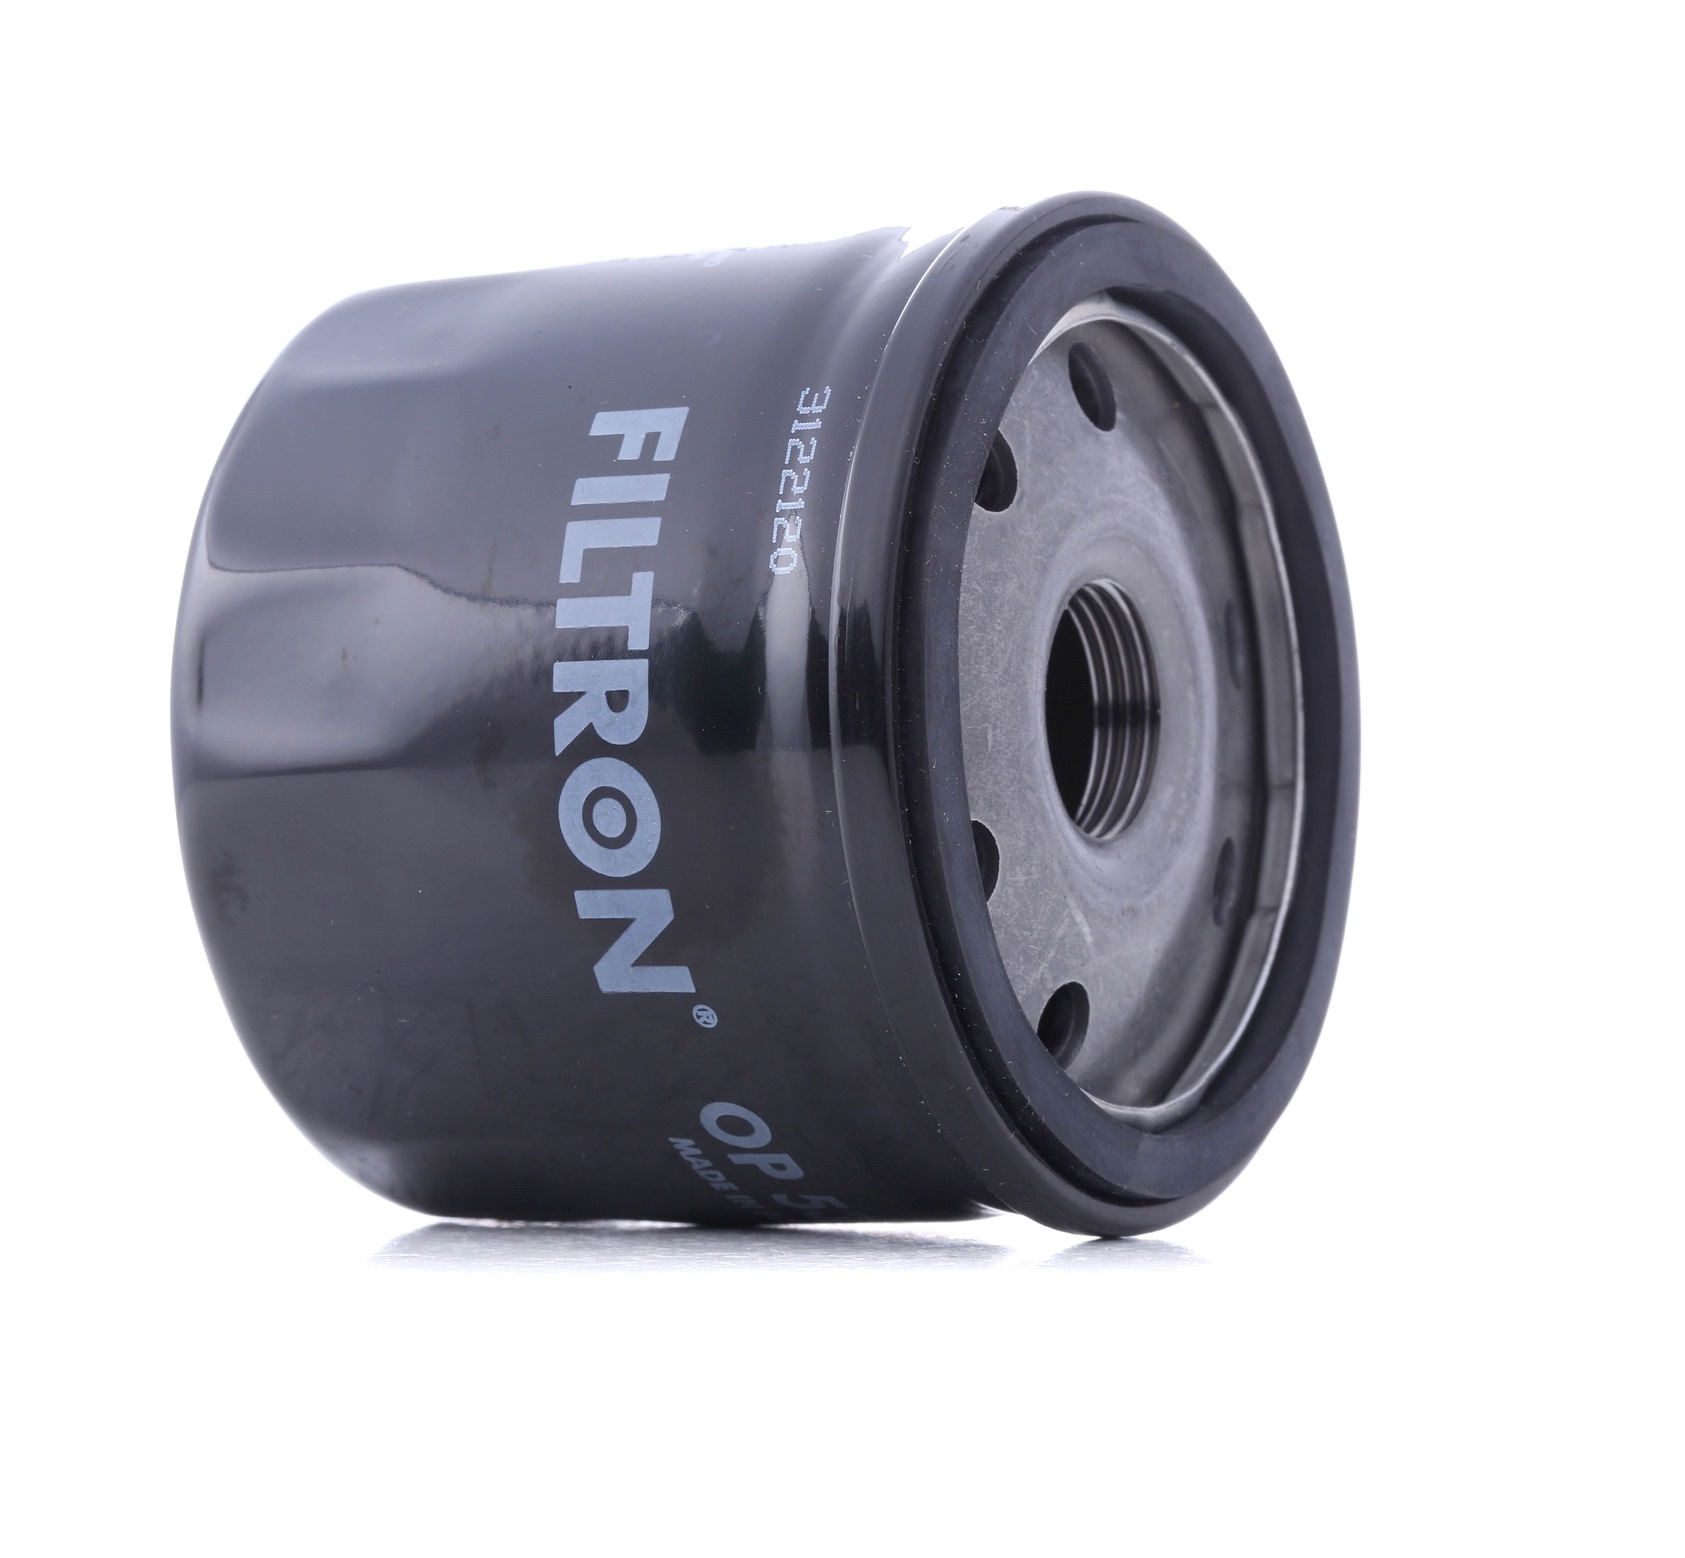 OP 537/2 FILTRON Oil filters ALFA ROMEO M 20 X 1.5, Spin-on Filter